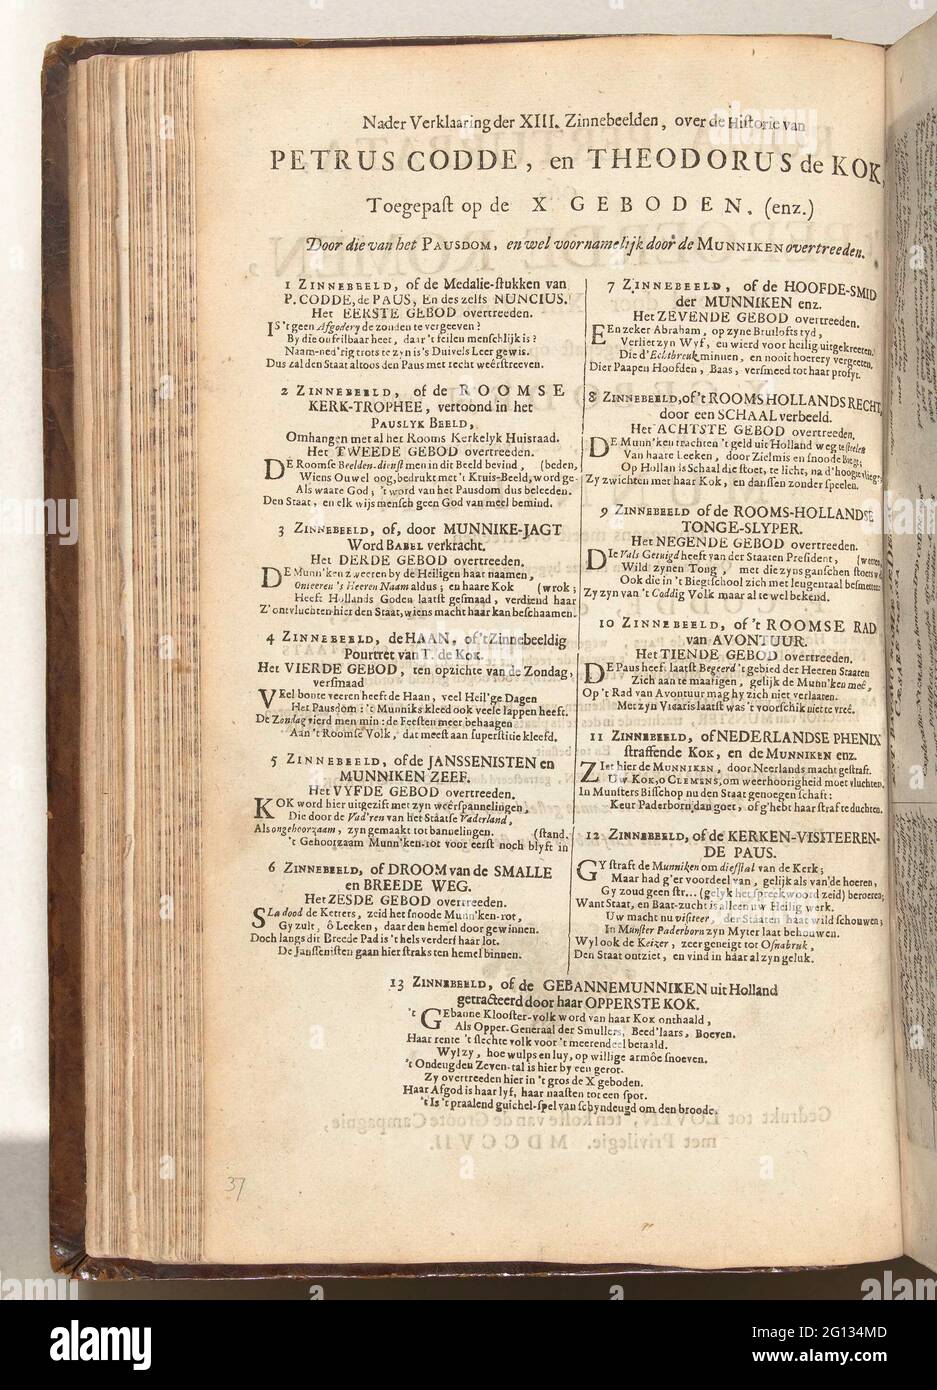 Table of contents for Roma Pertubata, 1706; Further explaining the XIII. Sommon images, about the history of Petrus Codde, and Theodorus de Kok, applied to the X commandments. (etc.); Roma Pertubata / 't Lusthof from MoMus. Table of contents for the Roma Pertubata series of 1706, in the new multiplied edition of 1707. Two columns with a verse for each of the 13 cartoons on the arts in 1705 between the Jesuits and the Jansenists in the Republic. Part of the printing work under the collective title 't Lust Court of Momus with the bundled series of cartooning during the 1901-1713 of the Spanish S Stock Photo